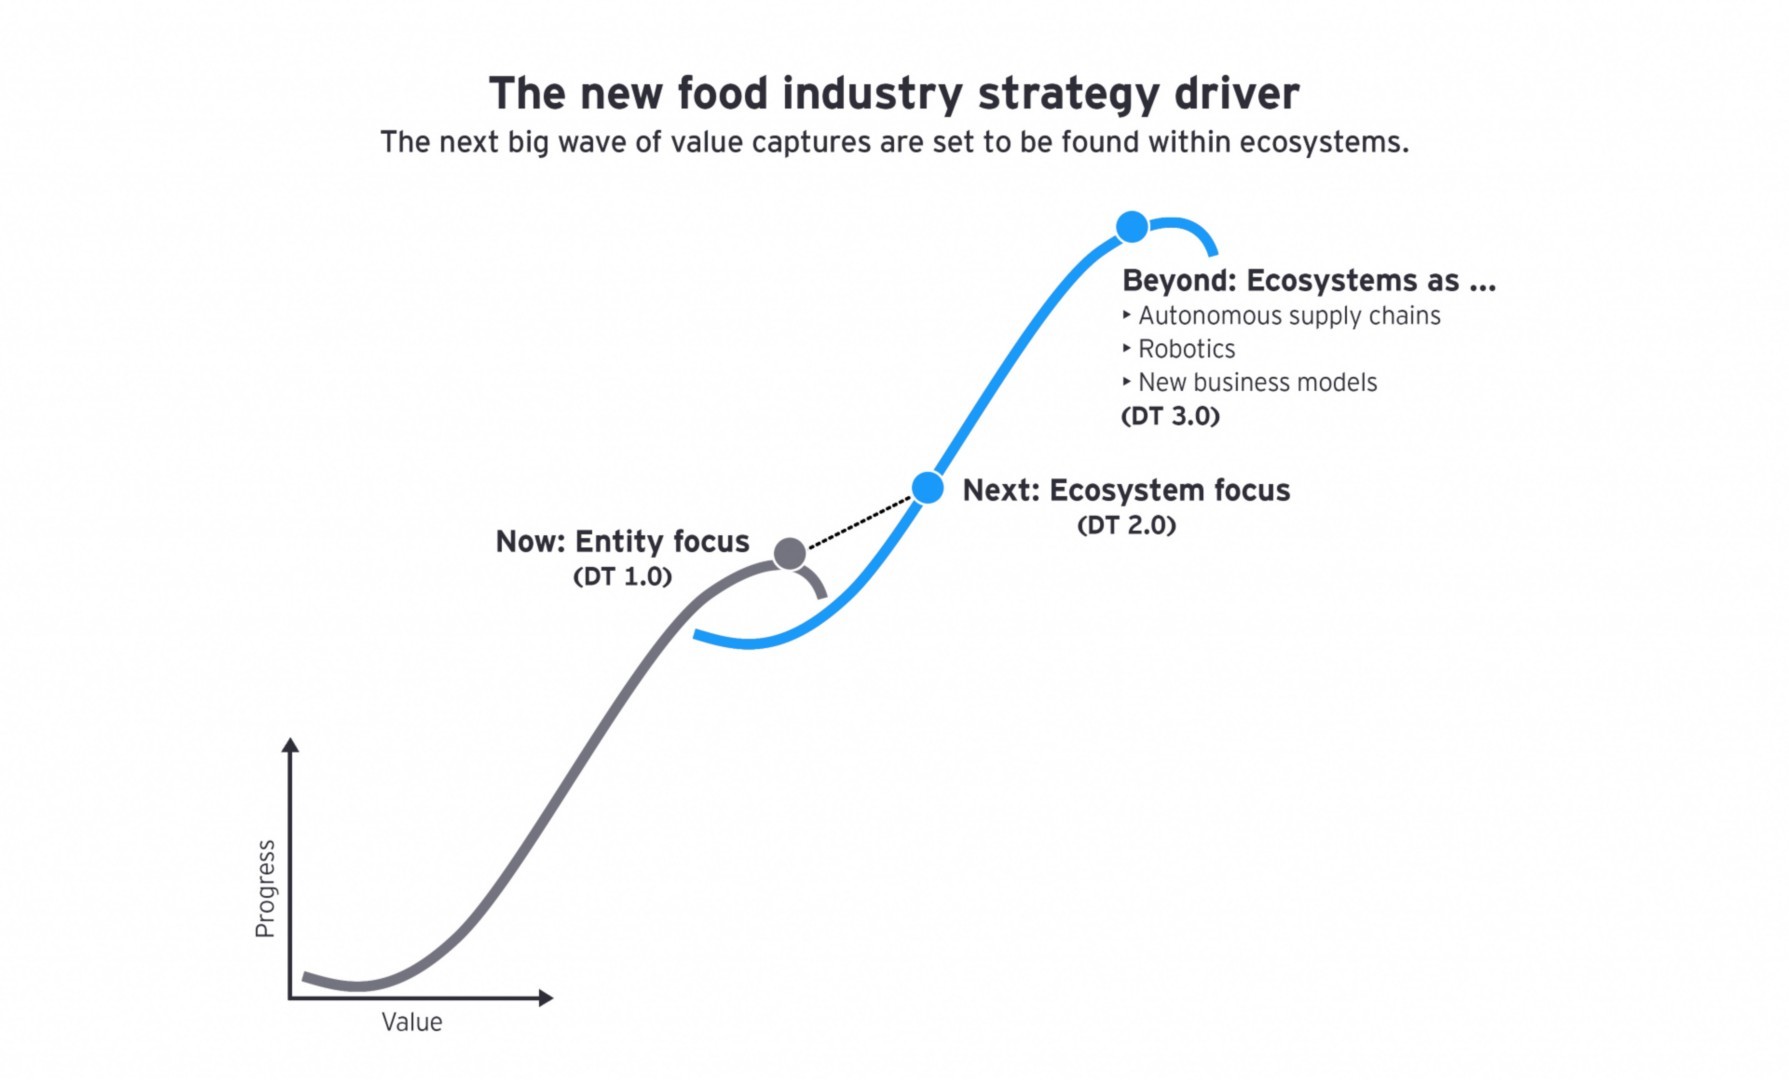 EY - Strategy driver in the food industry